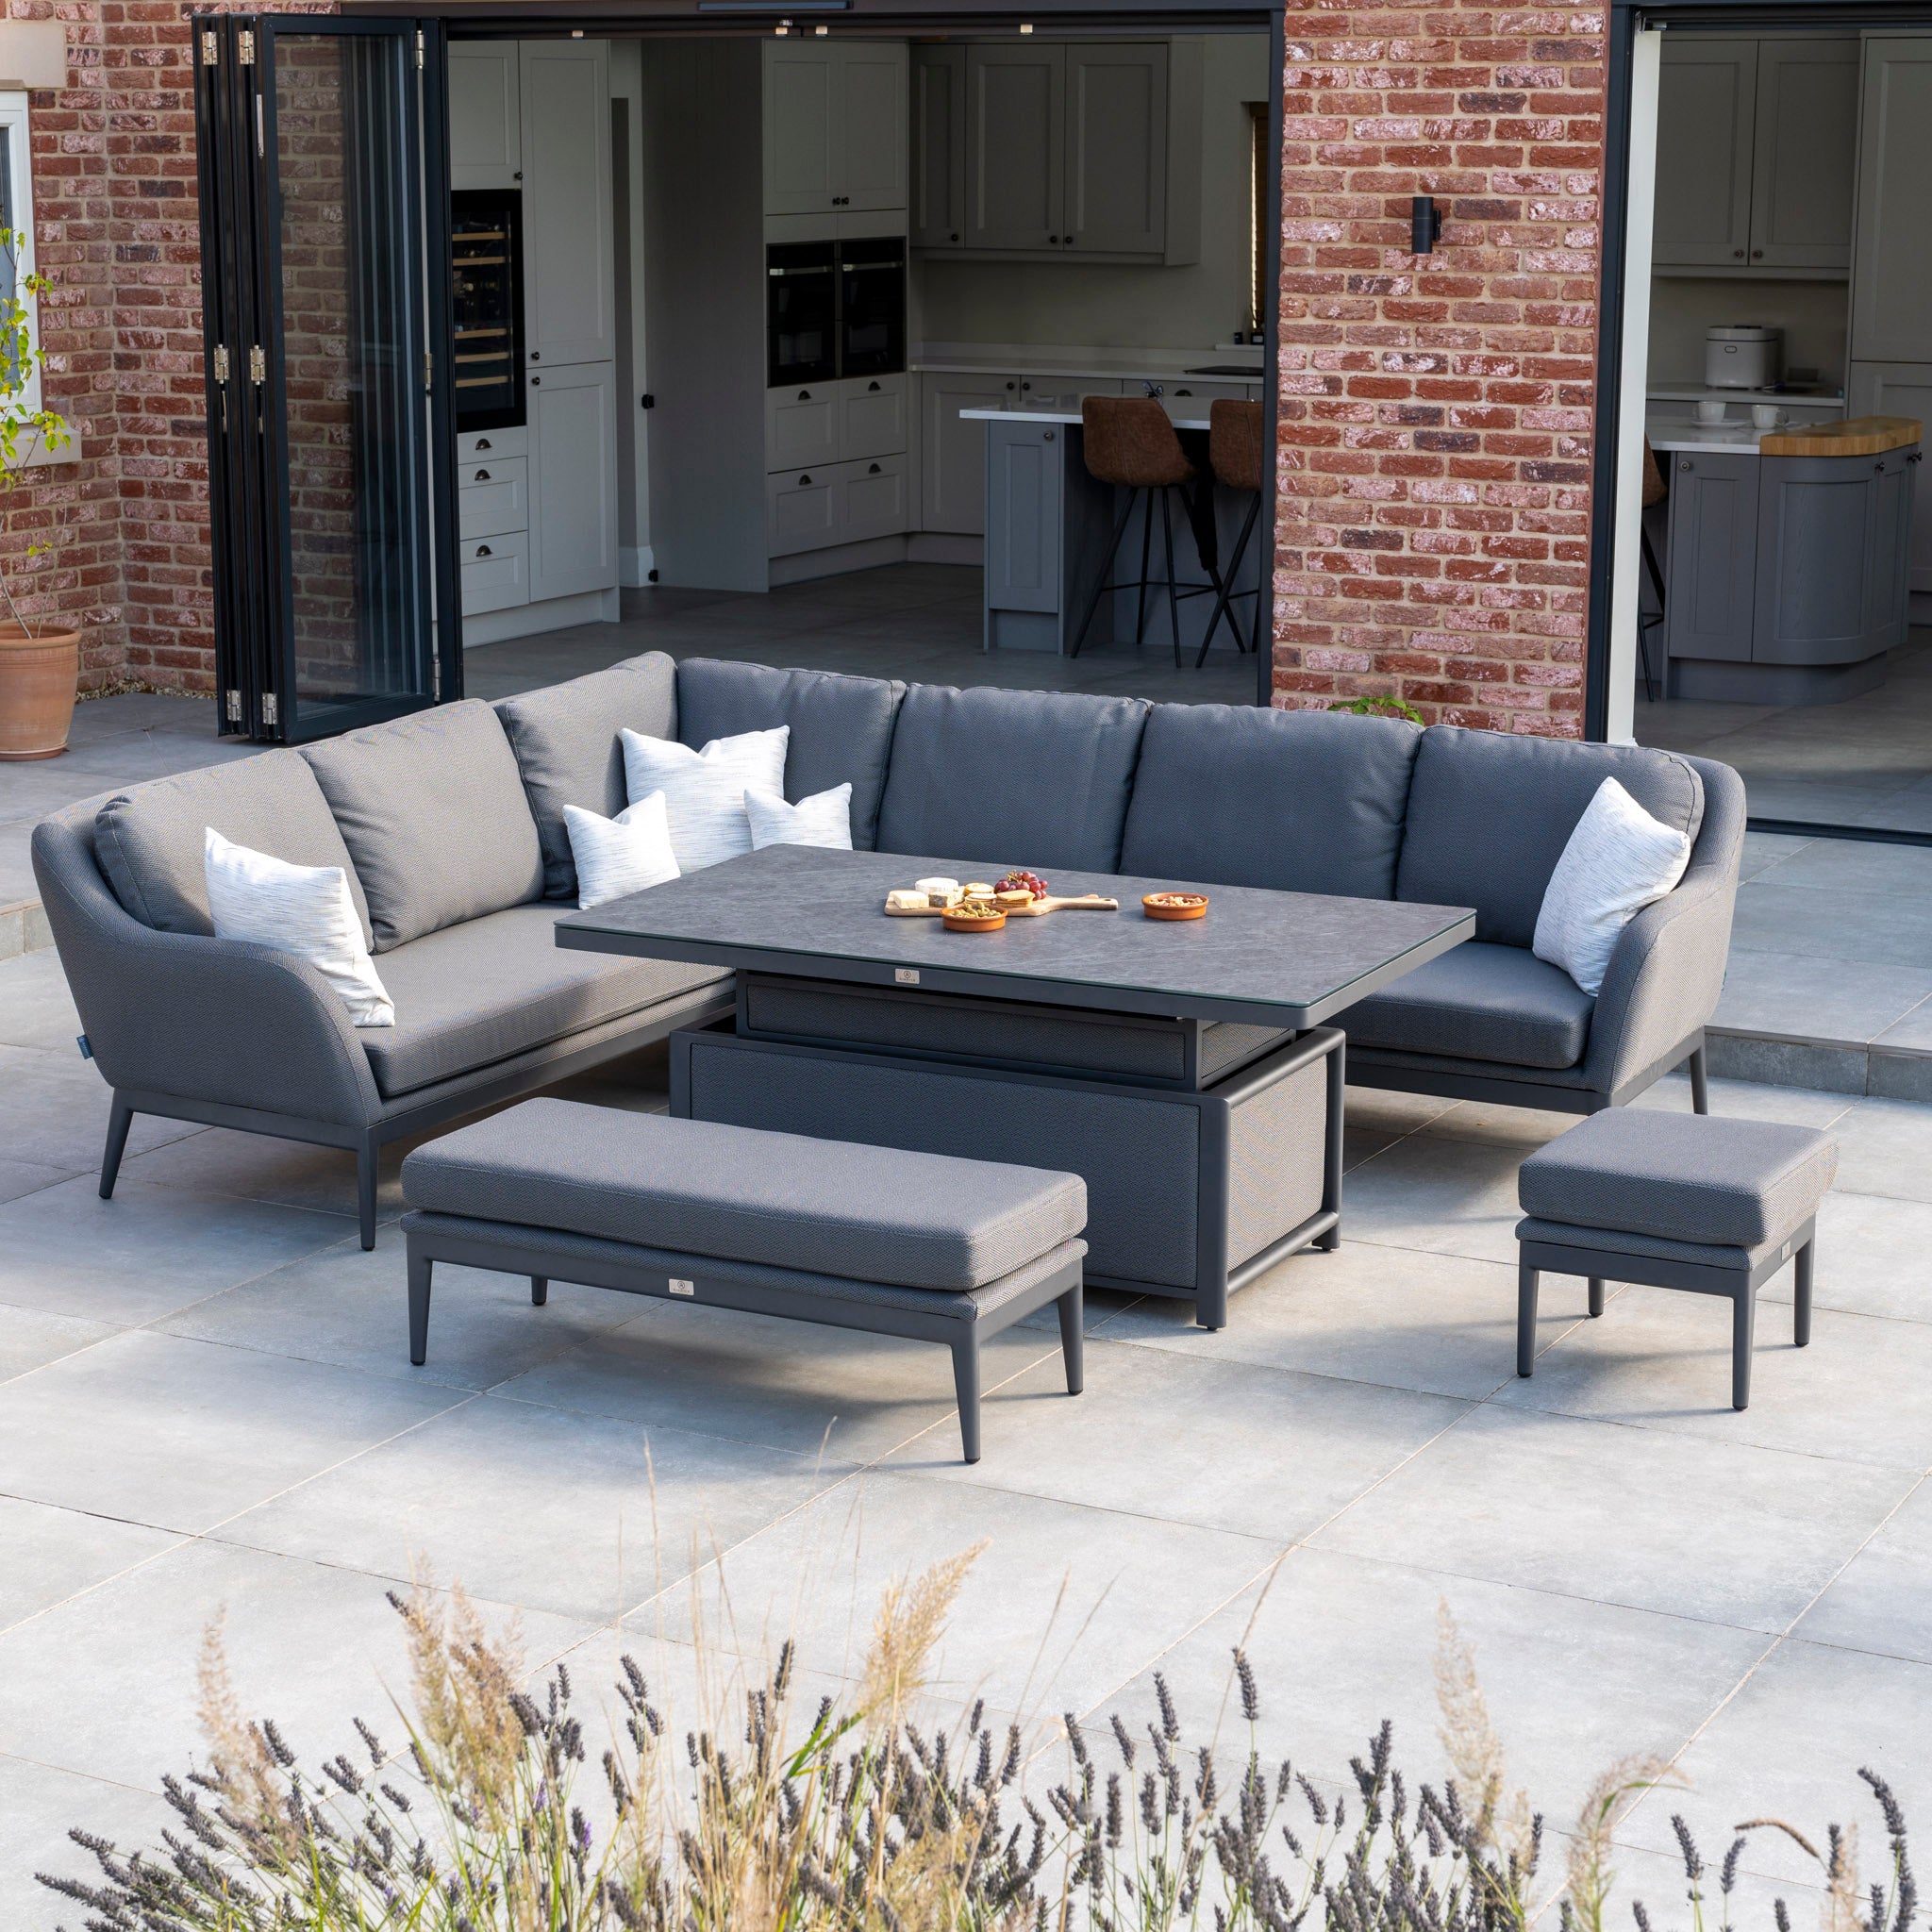 Luna Outdoor Fabric Rectangular Corner Dining Set with Rising Table in Grey (Left Hand)